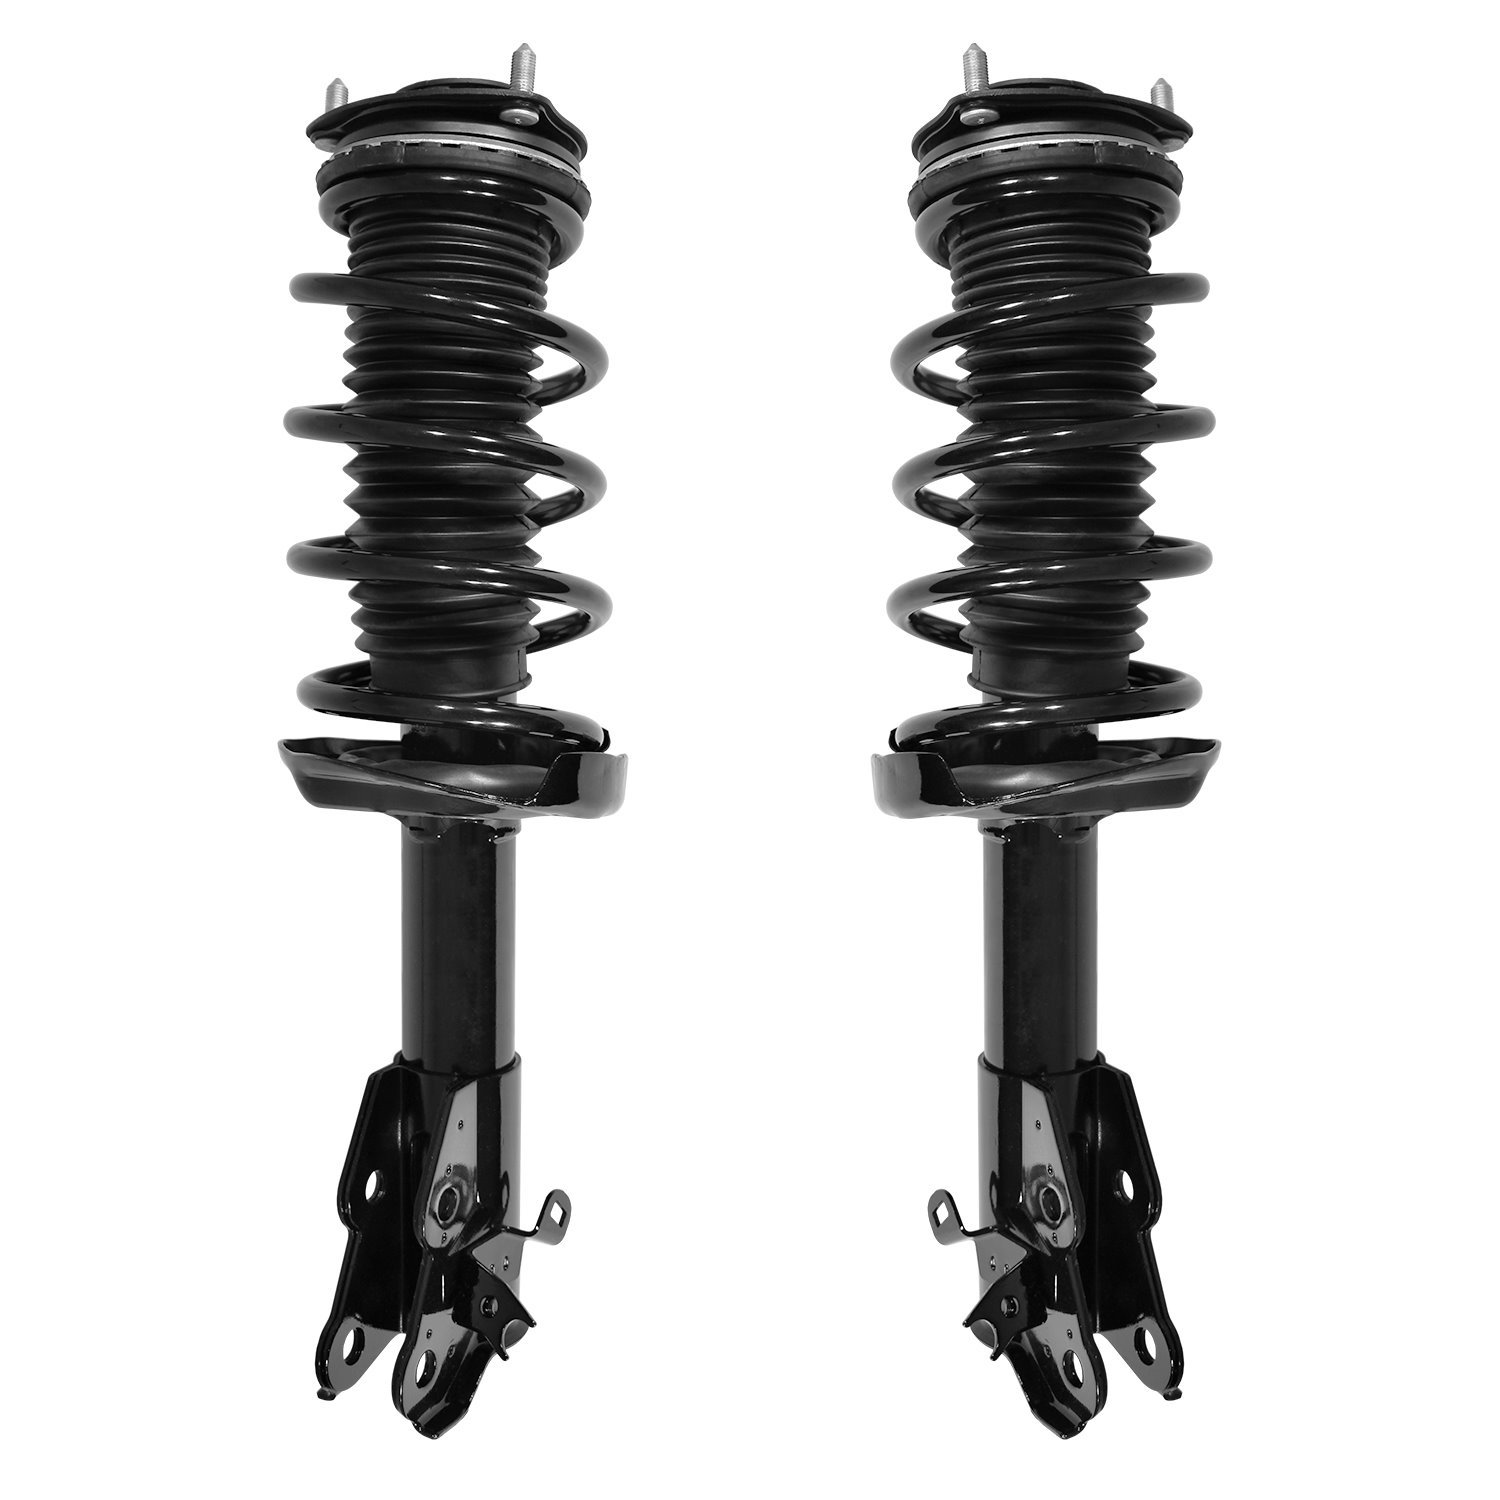 2-11815-11816-001 Suspension Strut & Coil Spring Assembly Set Fits Select Acura CSX, Honda Civic